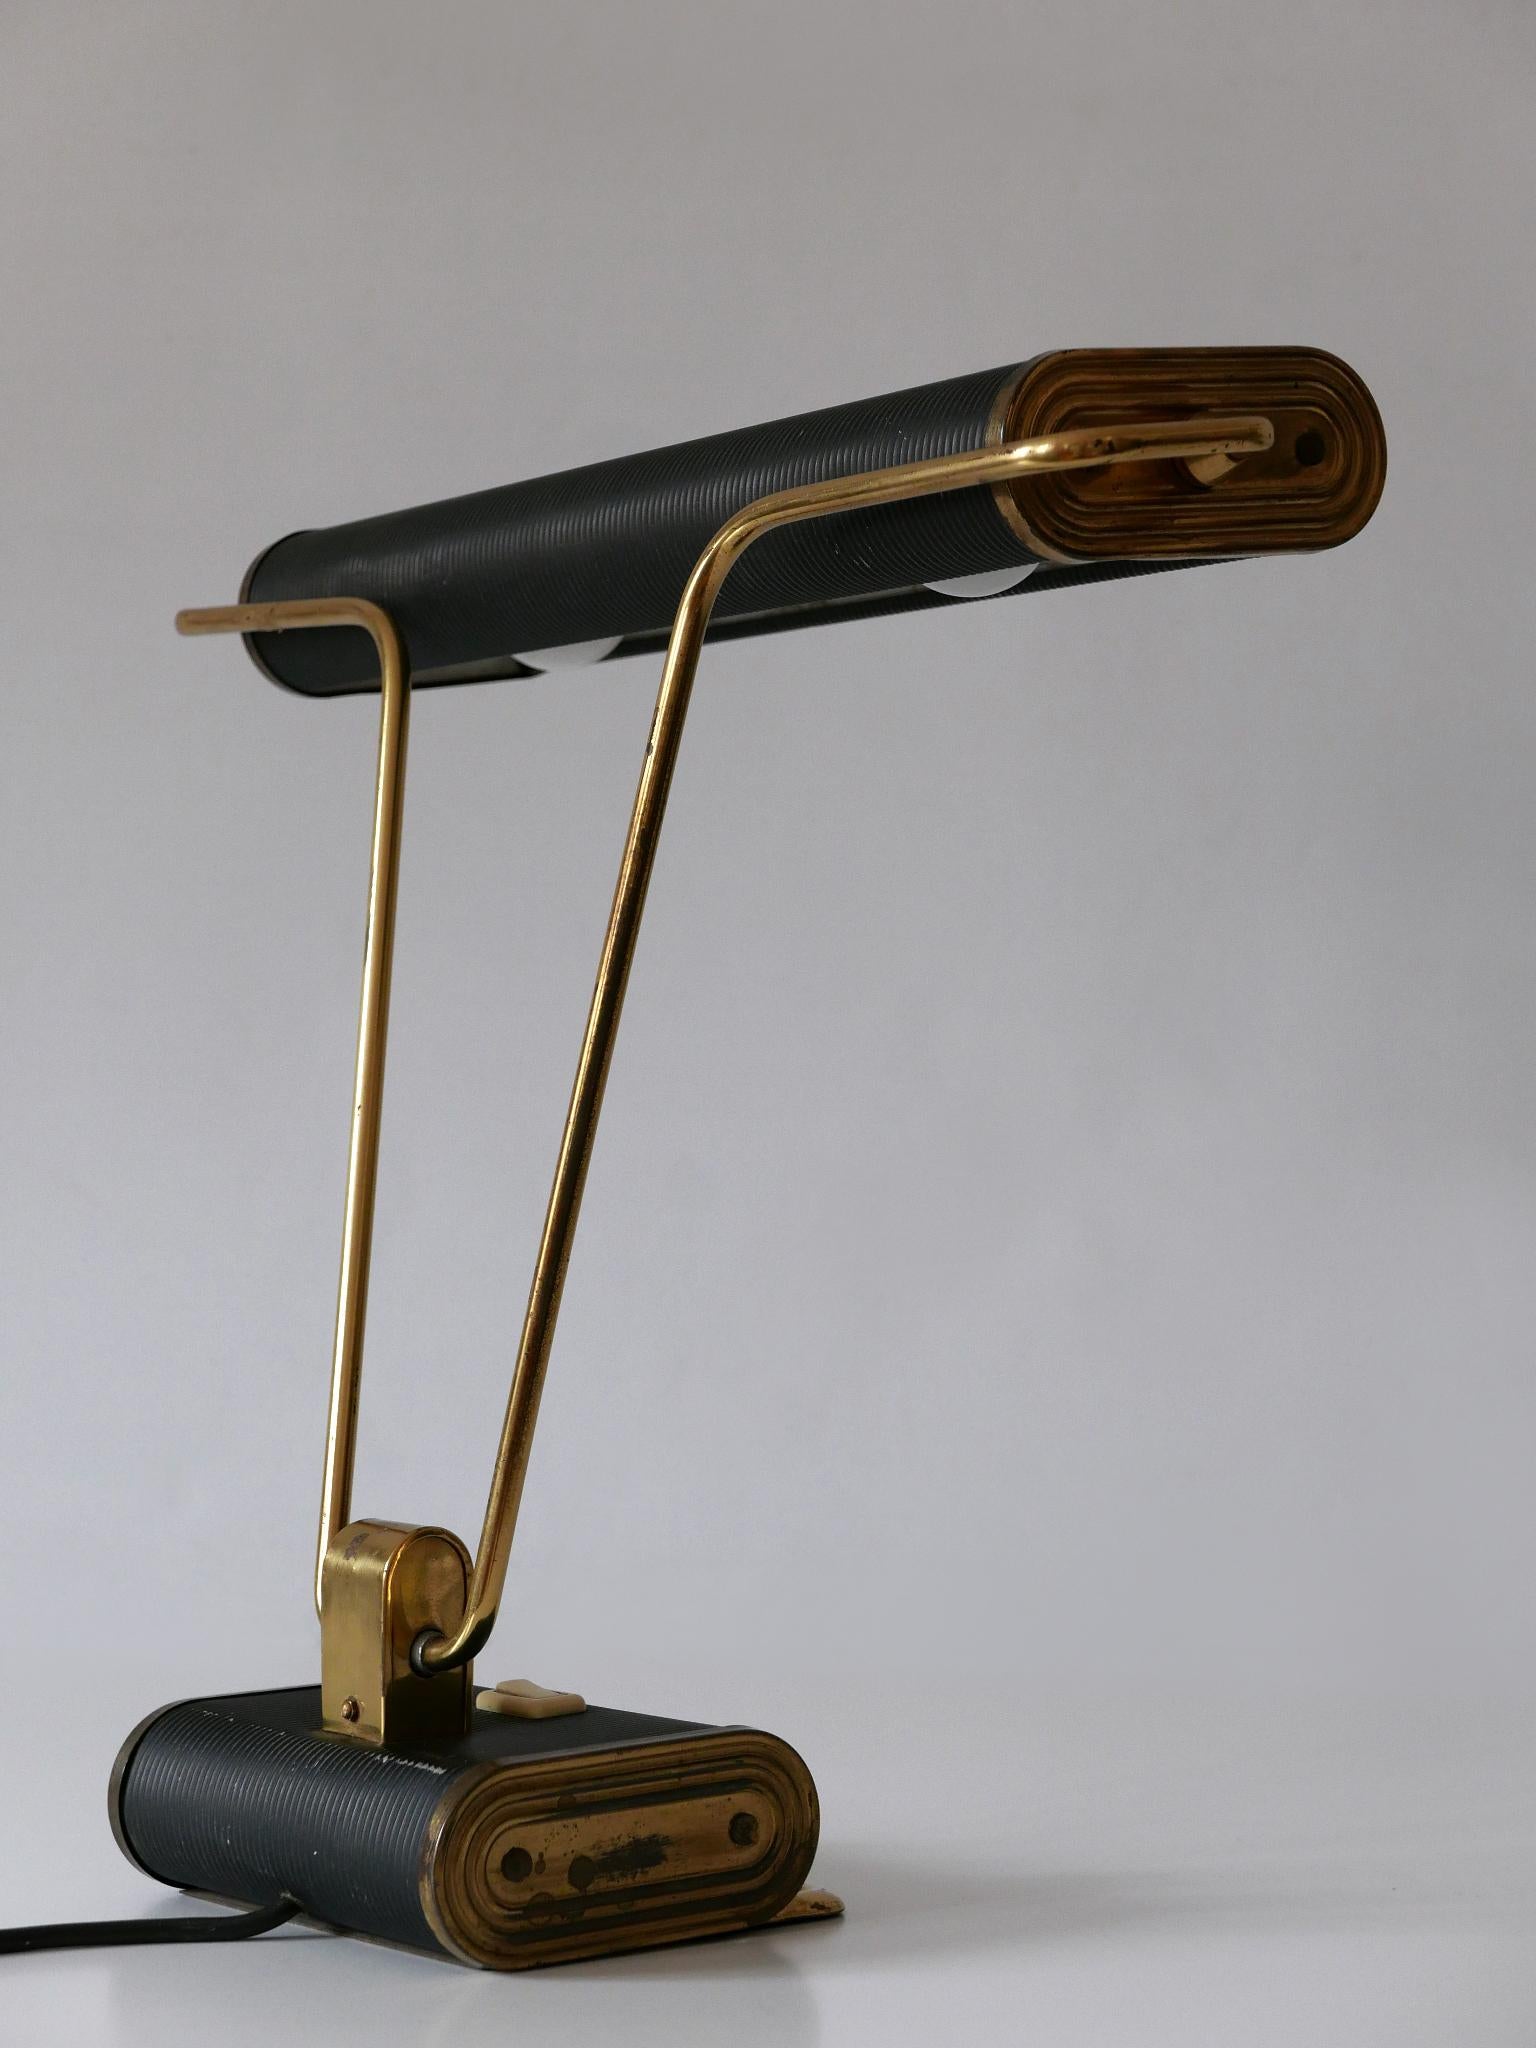 Mid-20th Century Art Deco Table Lamp or Desk Light 'No 71' by André Mounique for Jumo 1930s For Sale